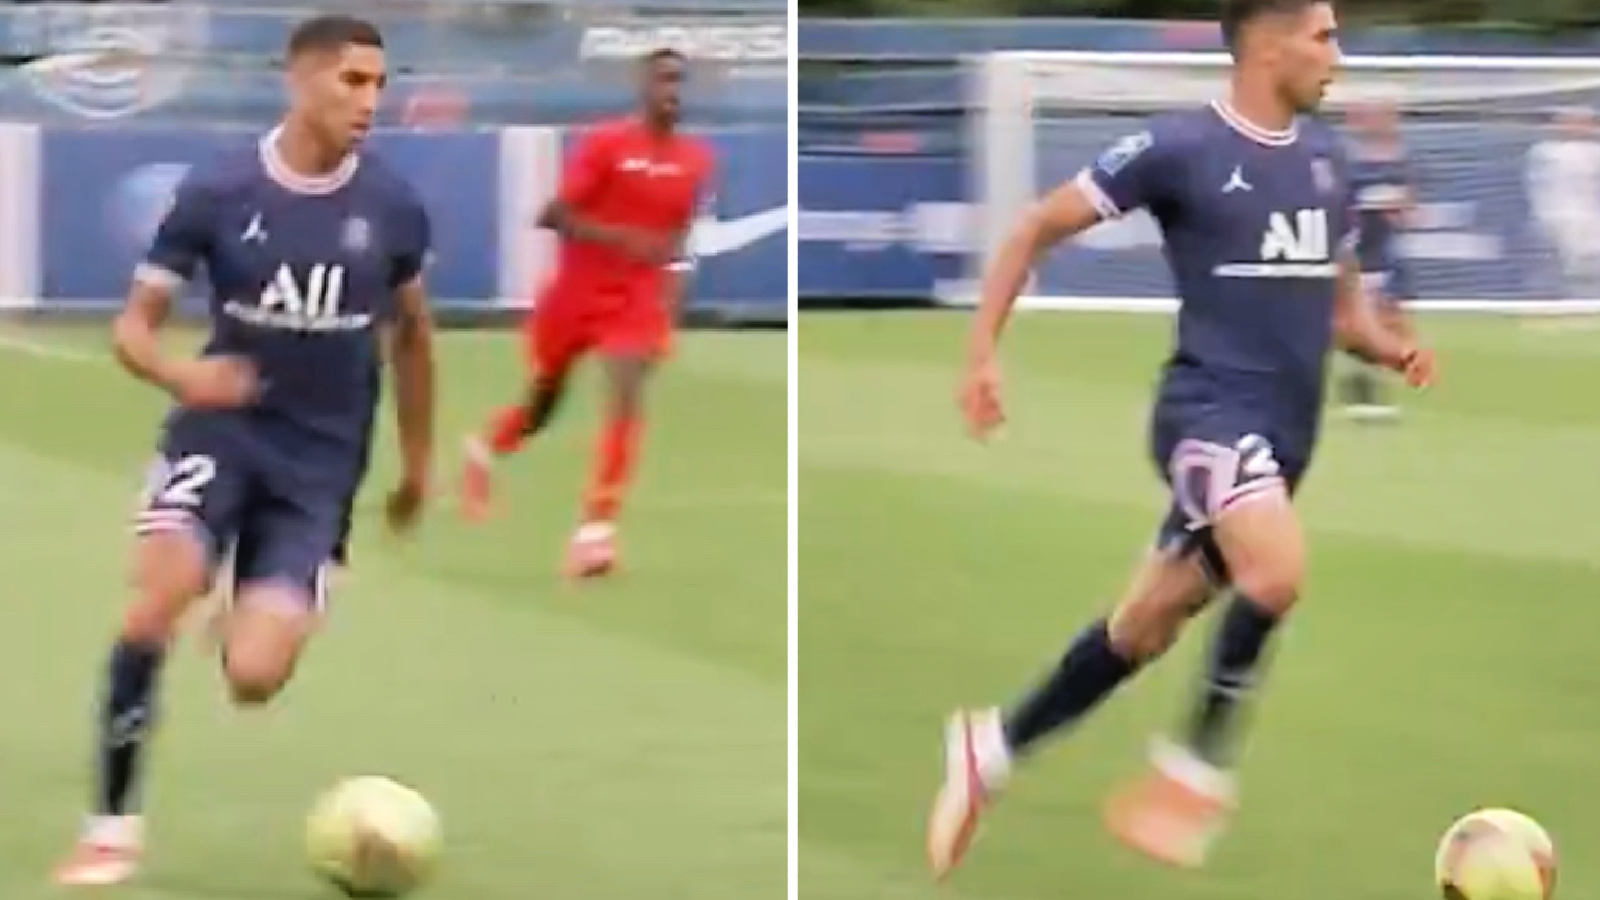 Achraf Hakimi pulled off a galloping run and assist during his first outing for PSG